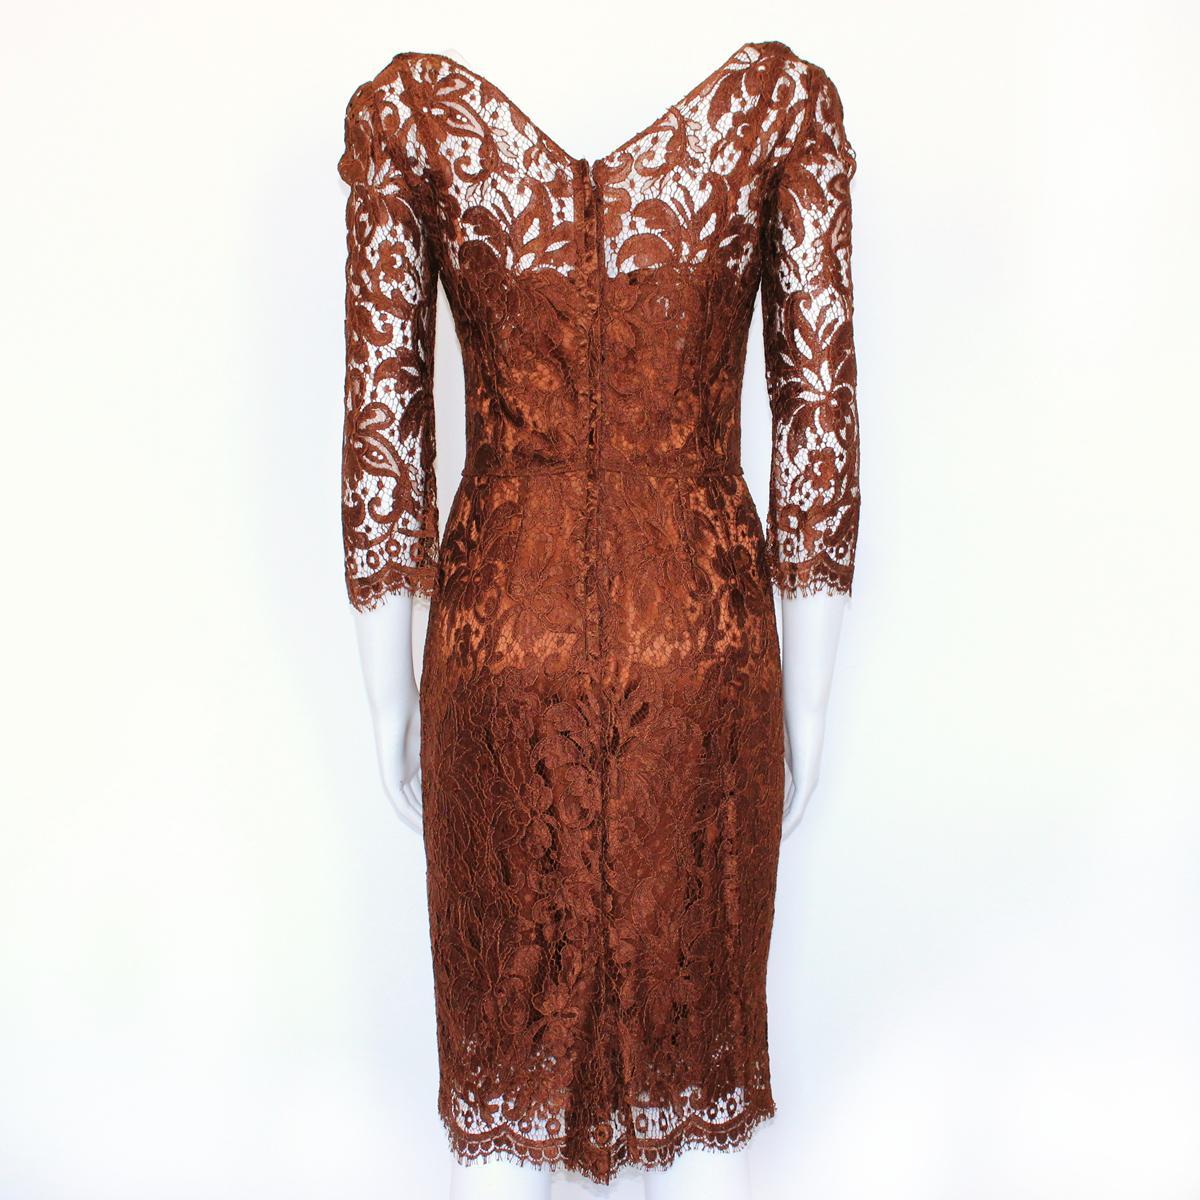 Iconic & chic dress by Dolce & Gabbana
Viscose (75%)
Rust colored lace
Long sleeve
Silk undervest
Back zip
Total lenght (shulder/hem) cm 100 (39.3 inches)
Worldwide express shipping included in the price !